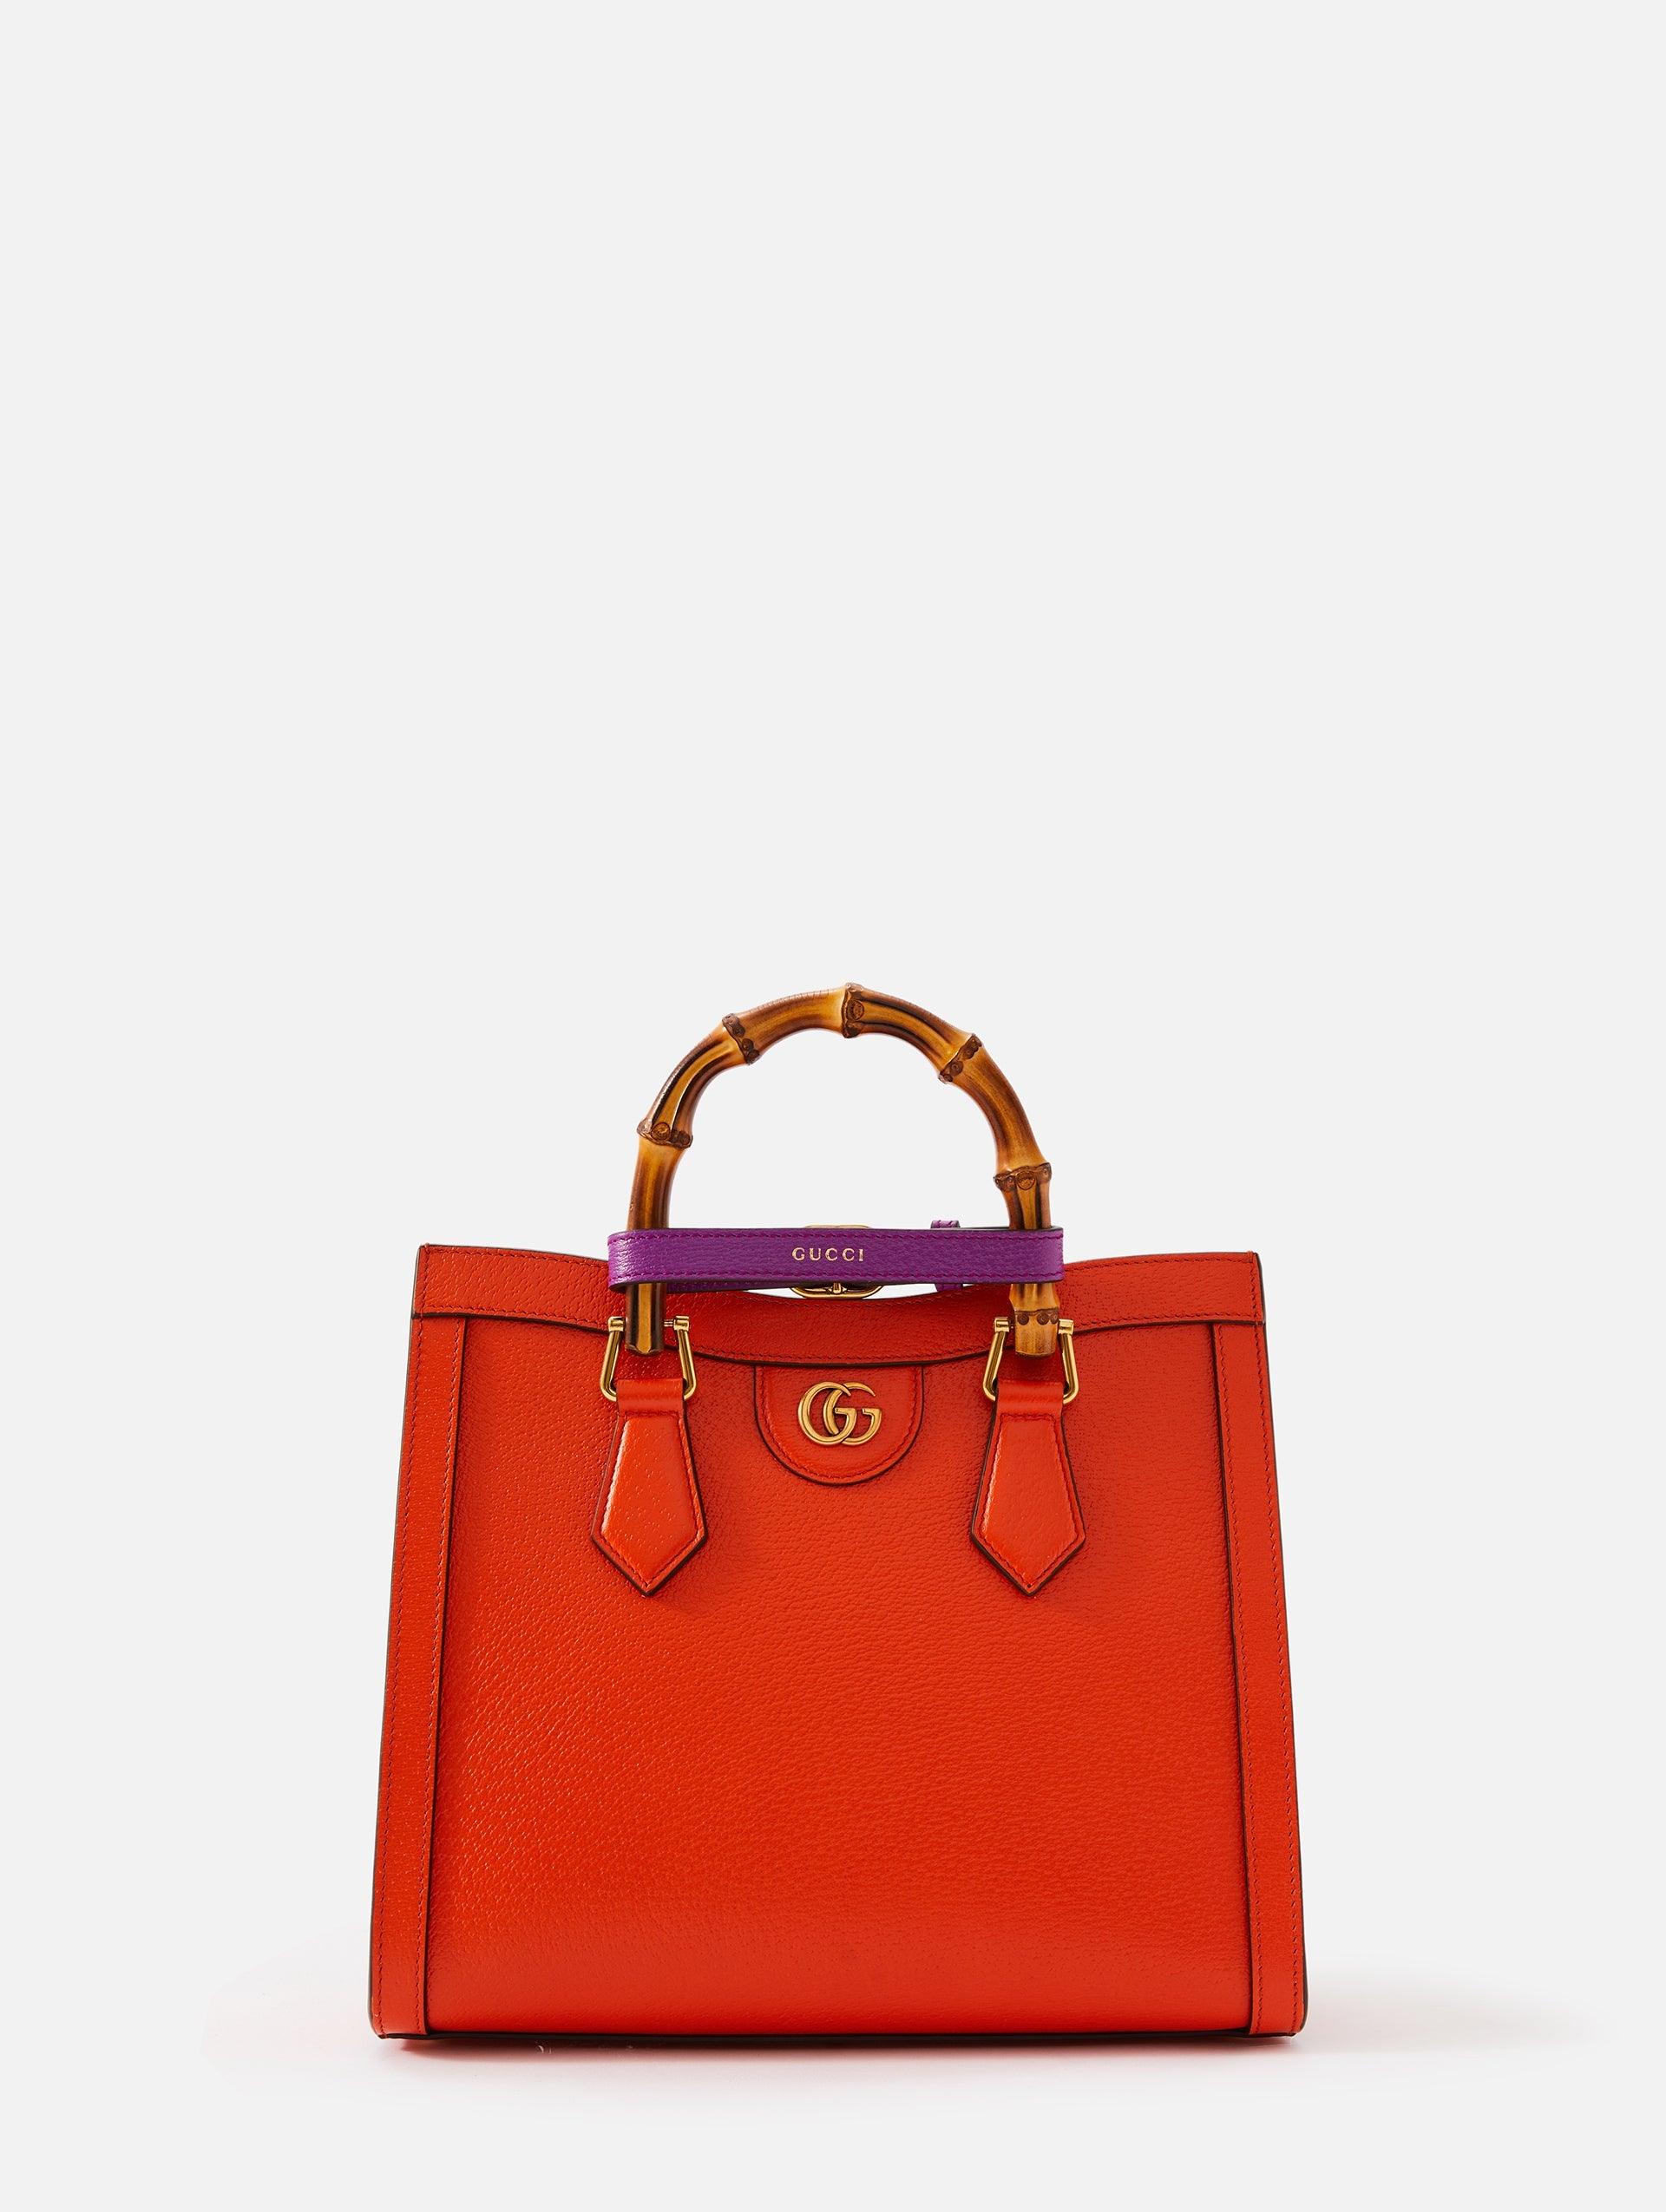 GUCCI Diana Small Tote Bag - The Iconic Issue